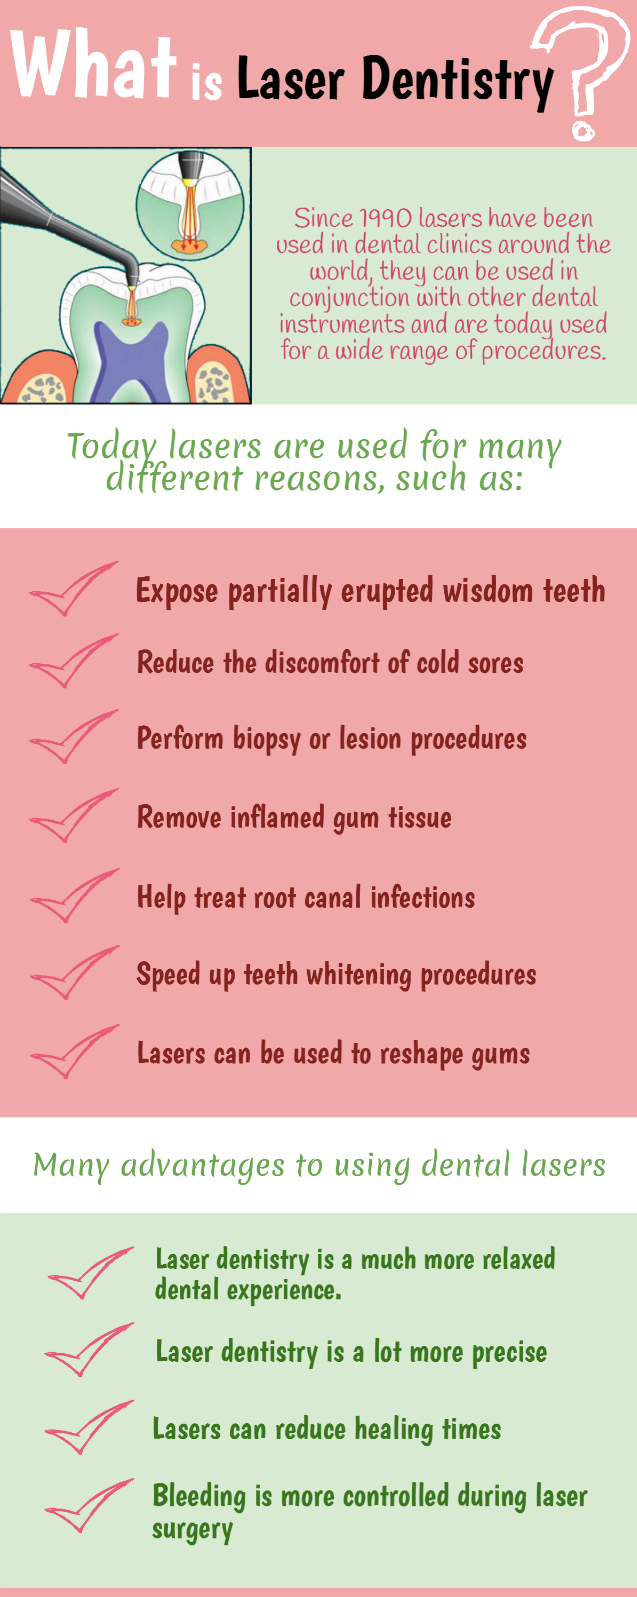 What is laser dentistry